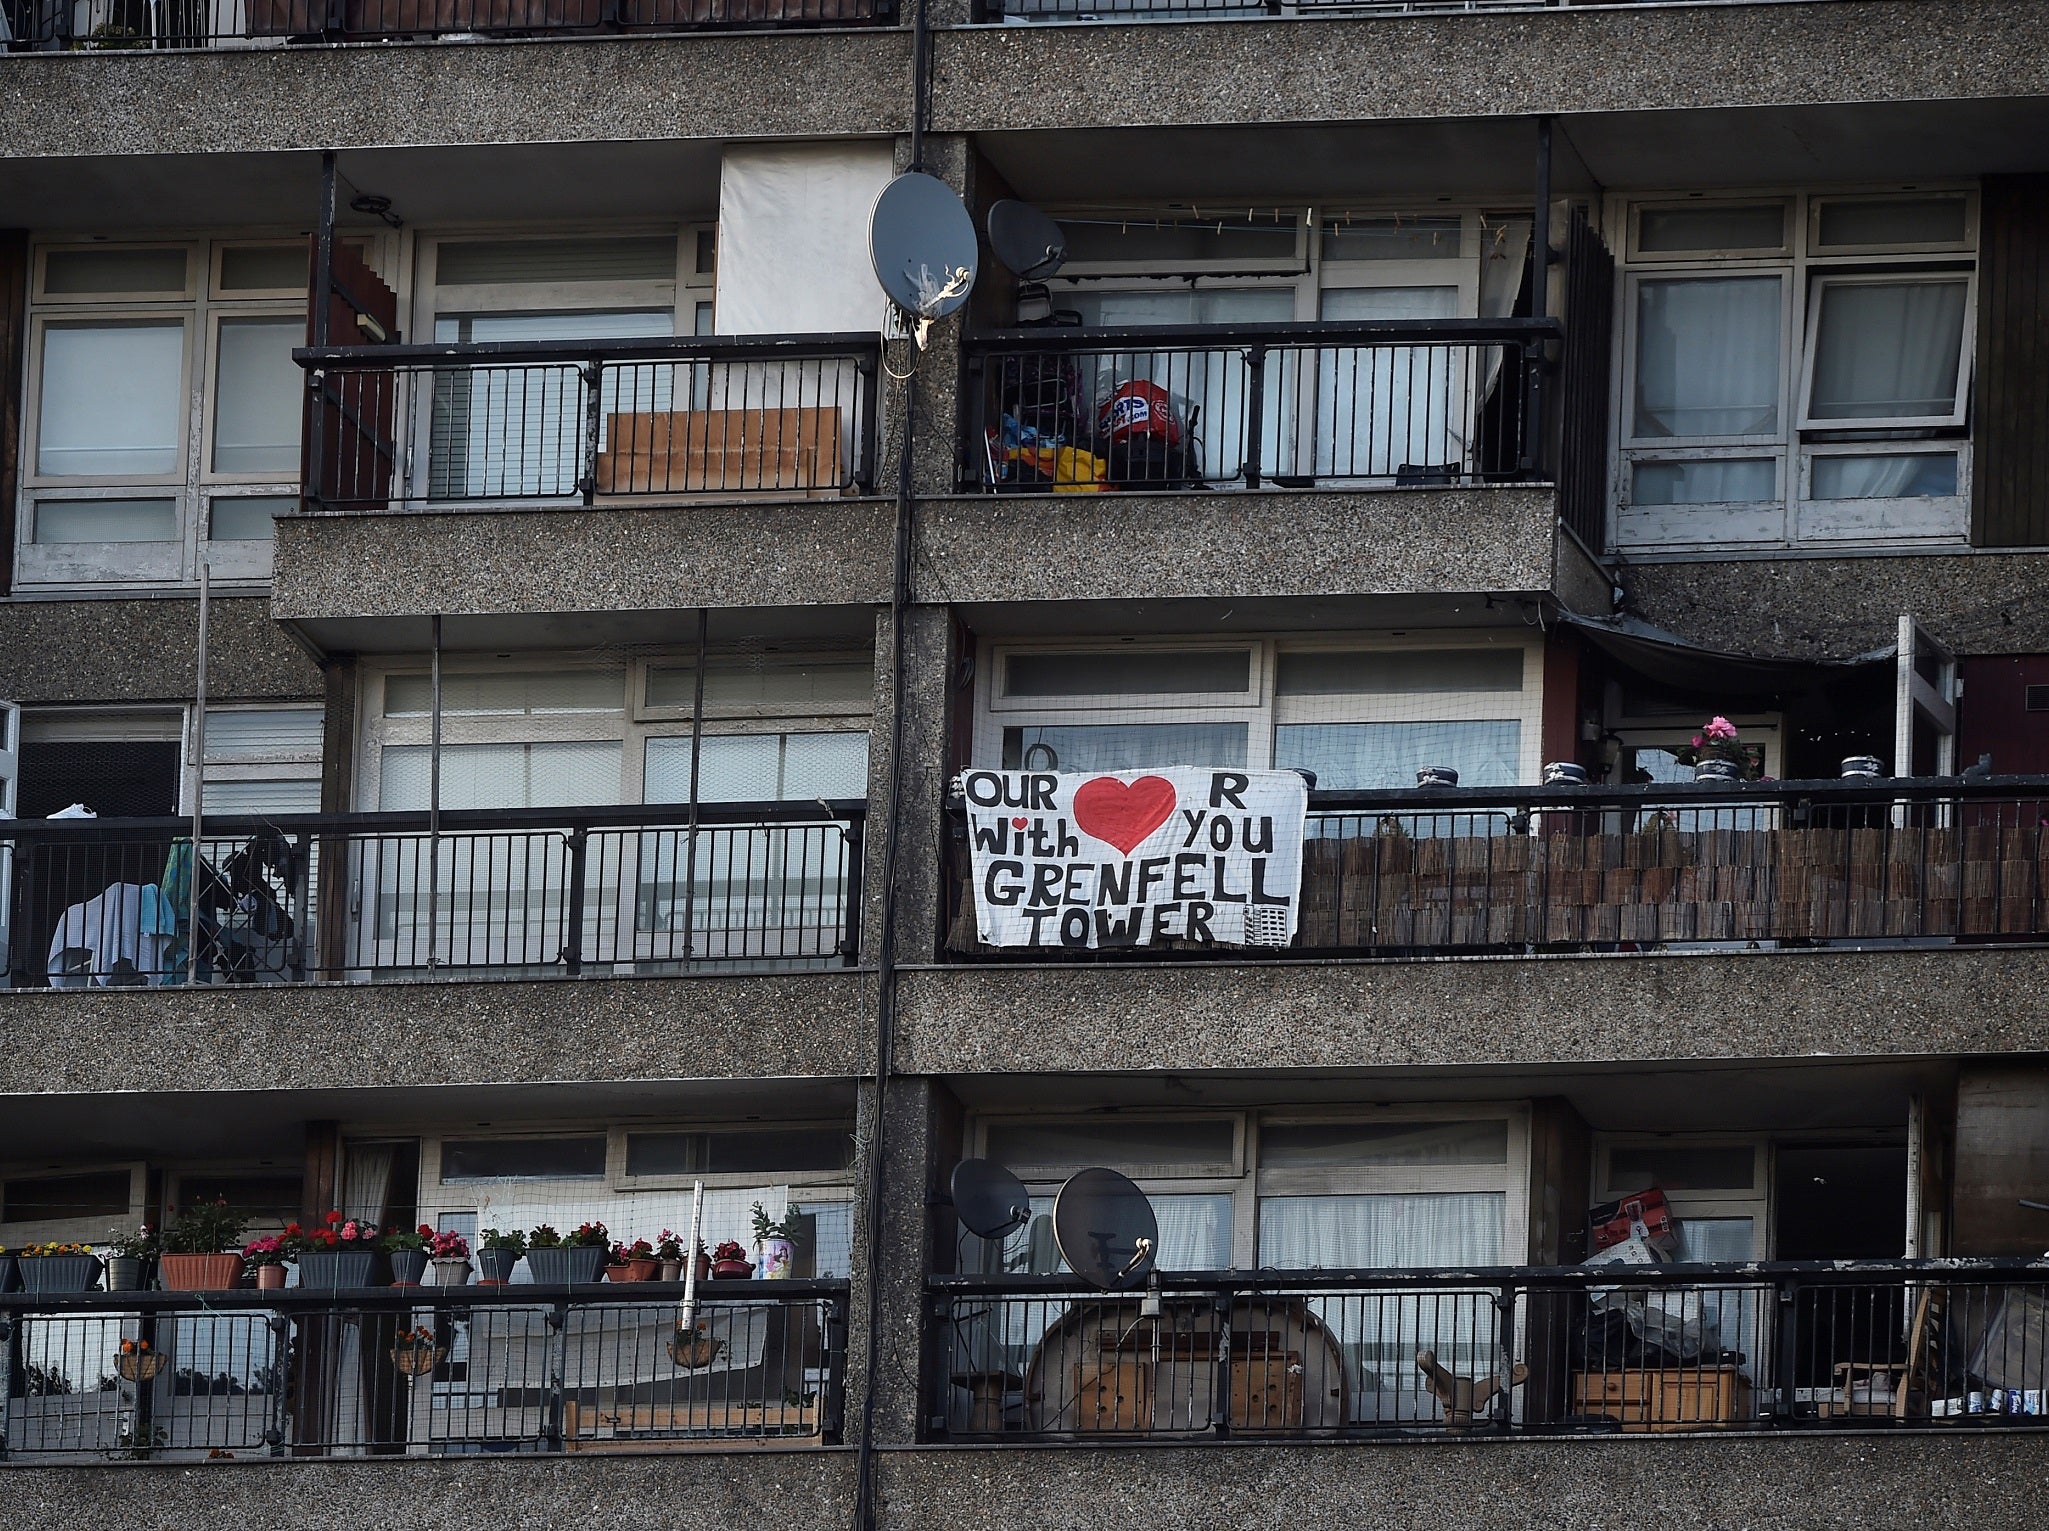 Residents in surrounding flats say they have not been advised on what to do in the case of emergency